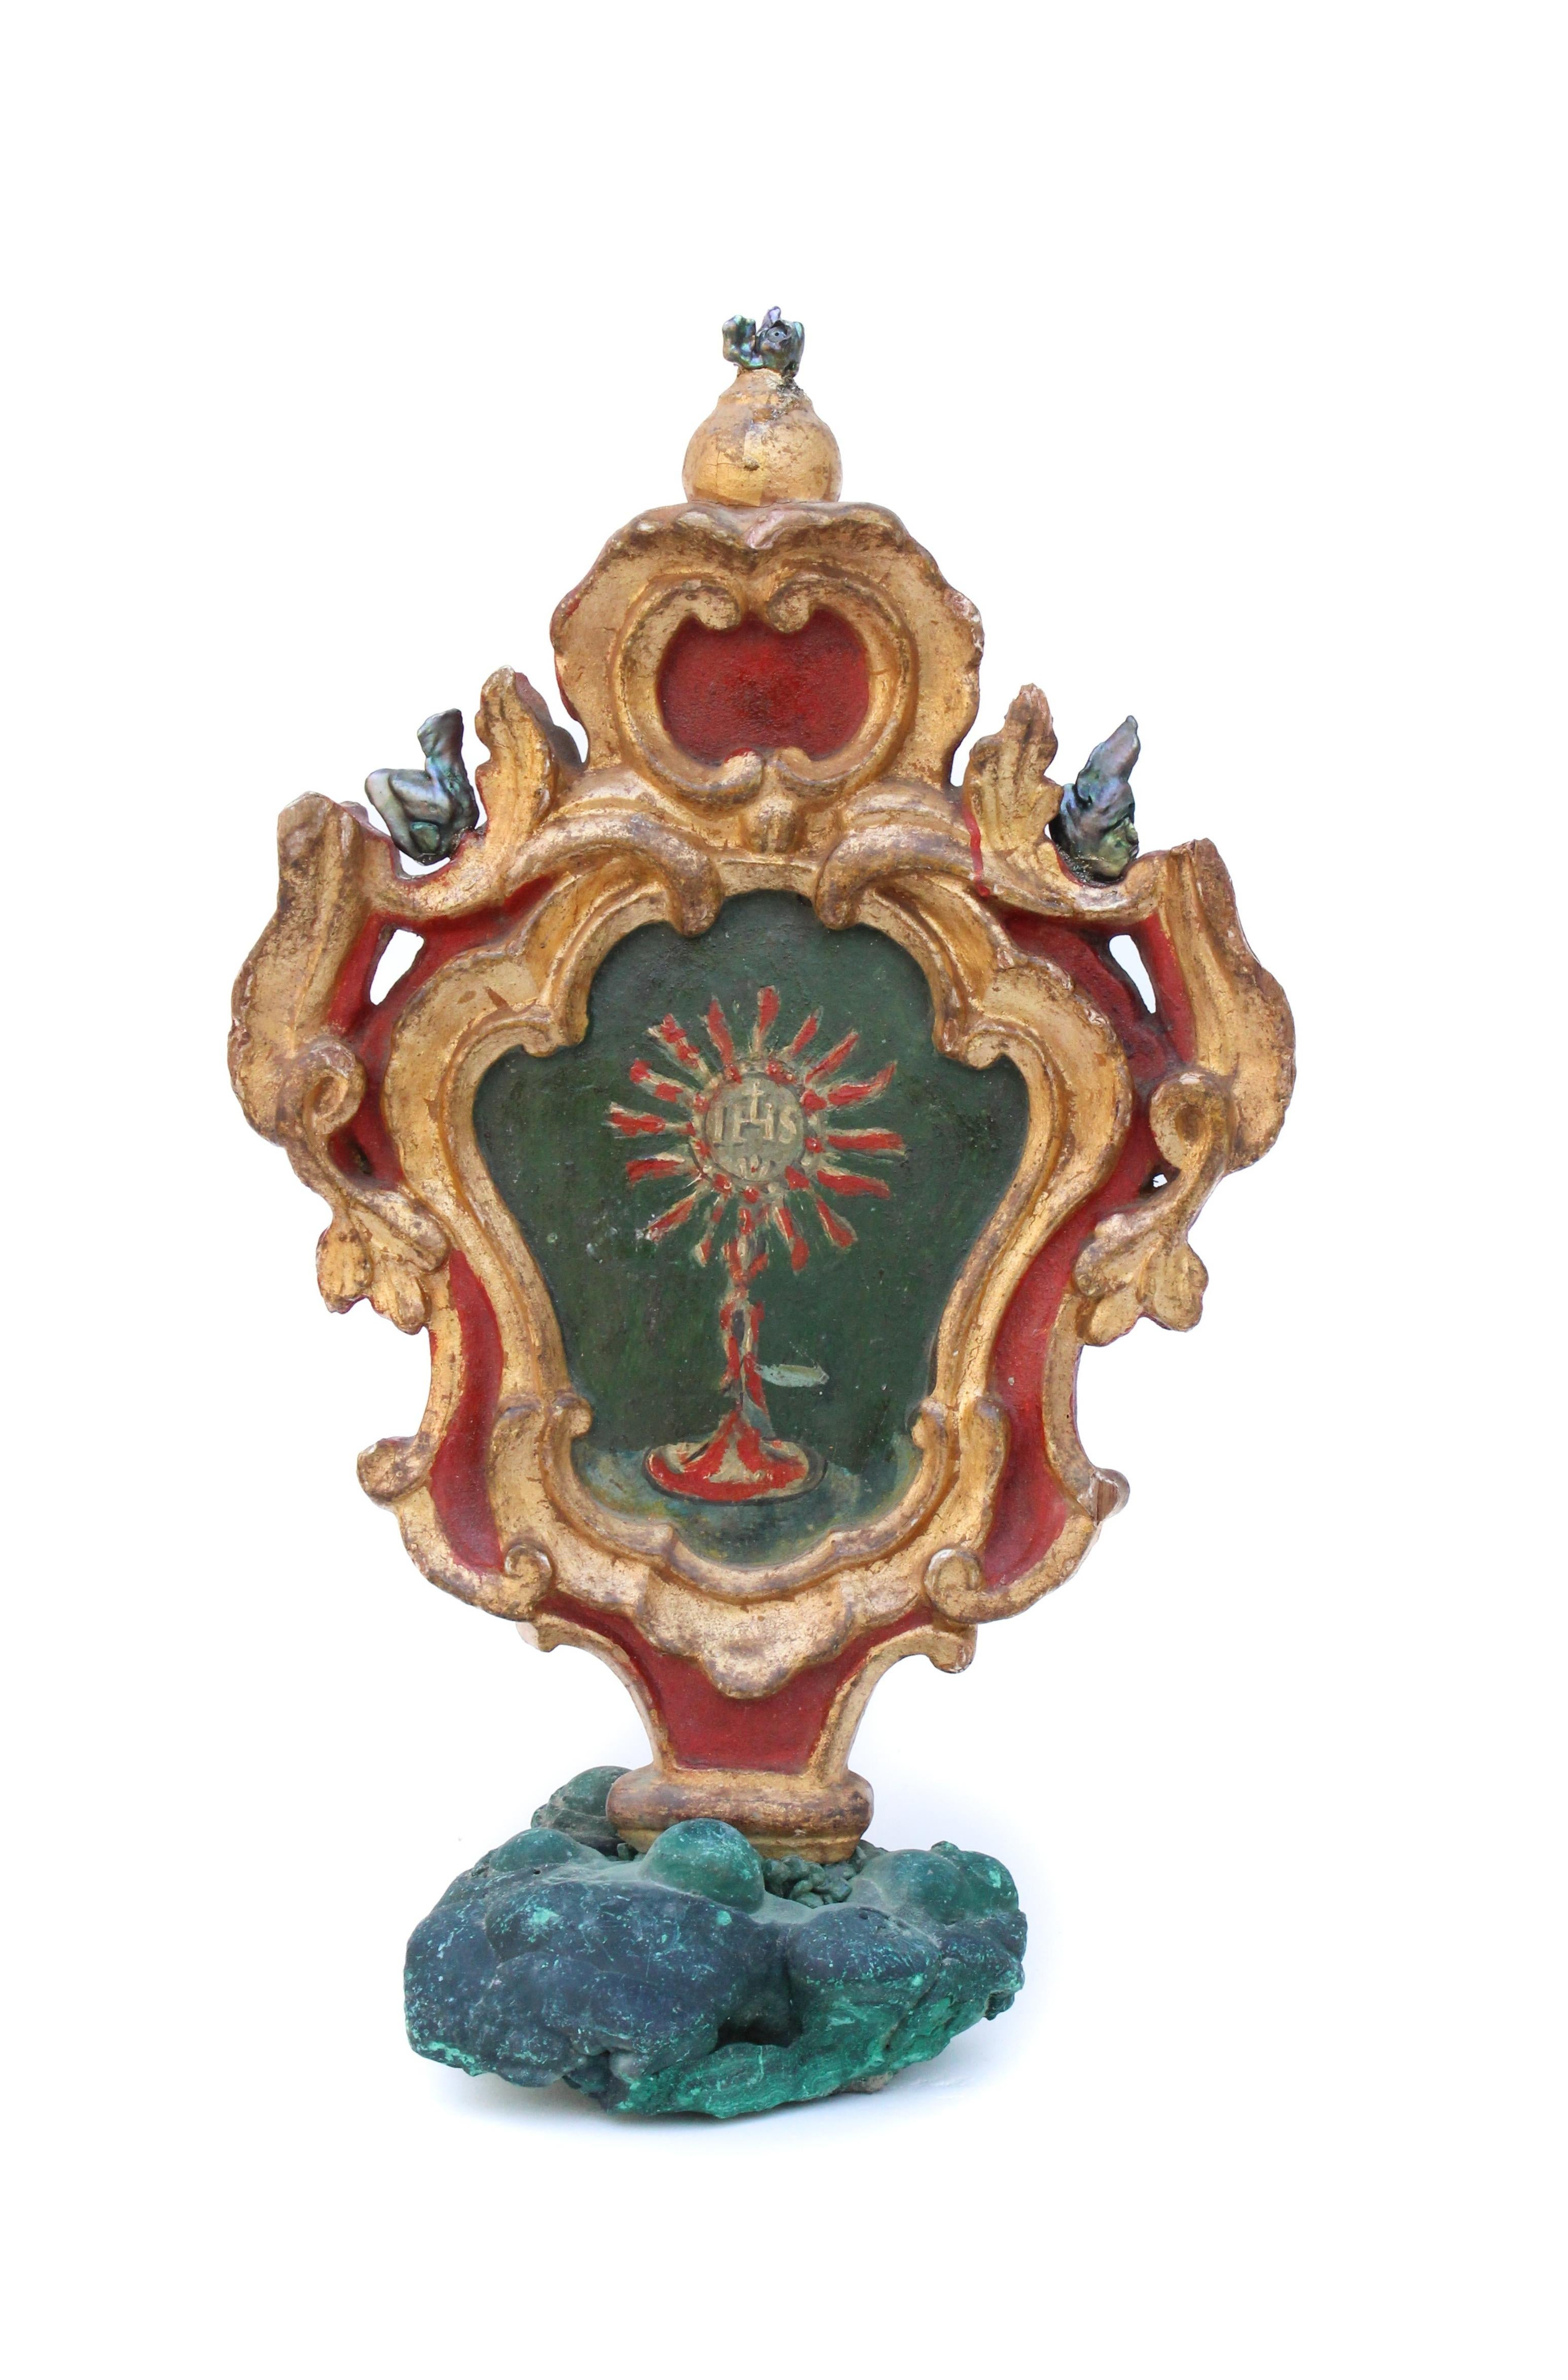 18th century Italian gilded and hand-painted processional finial with baroque pearls and mounted on malachite. The piece was originally part of a processional pole from a historical church in Italy. A eucharist is painted on one side and Mary is